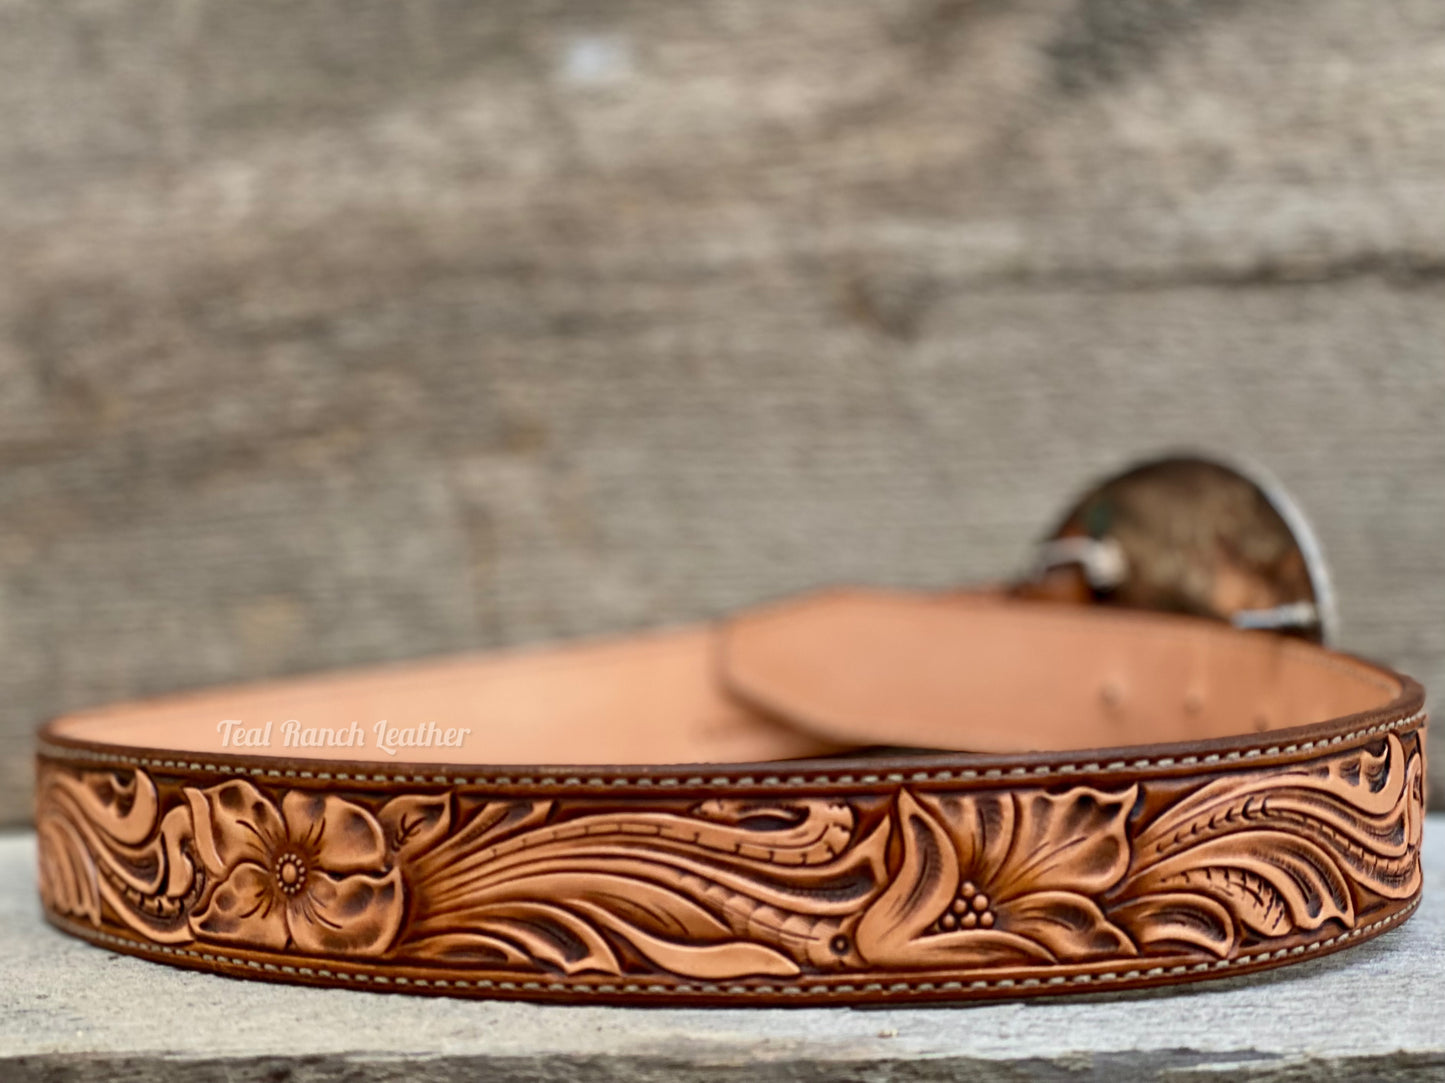 Tooled leather belt in walnut- size 29